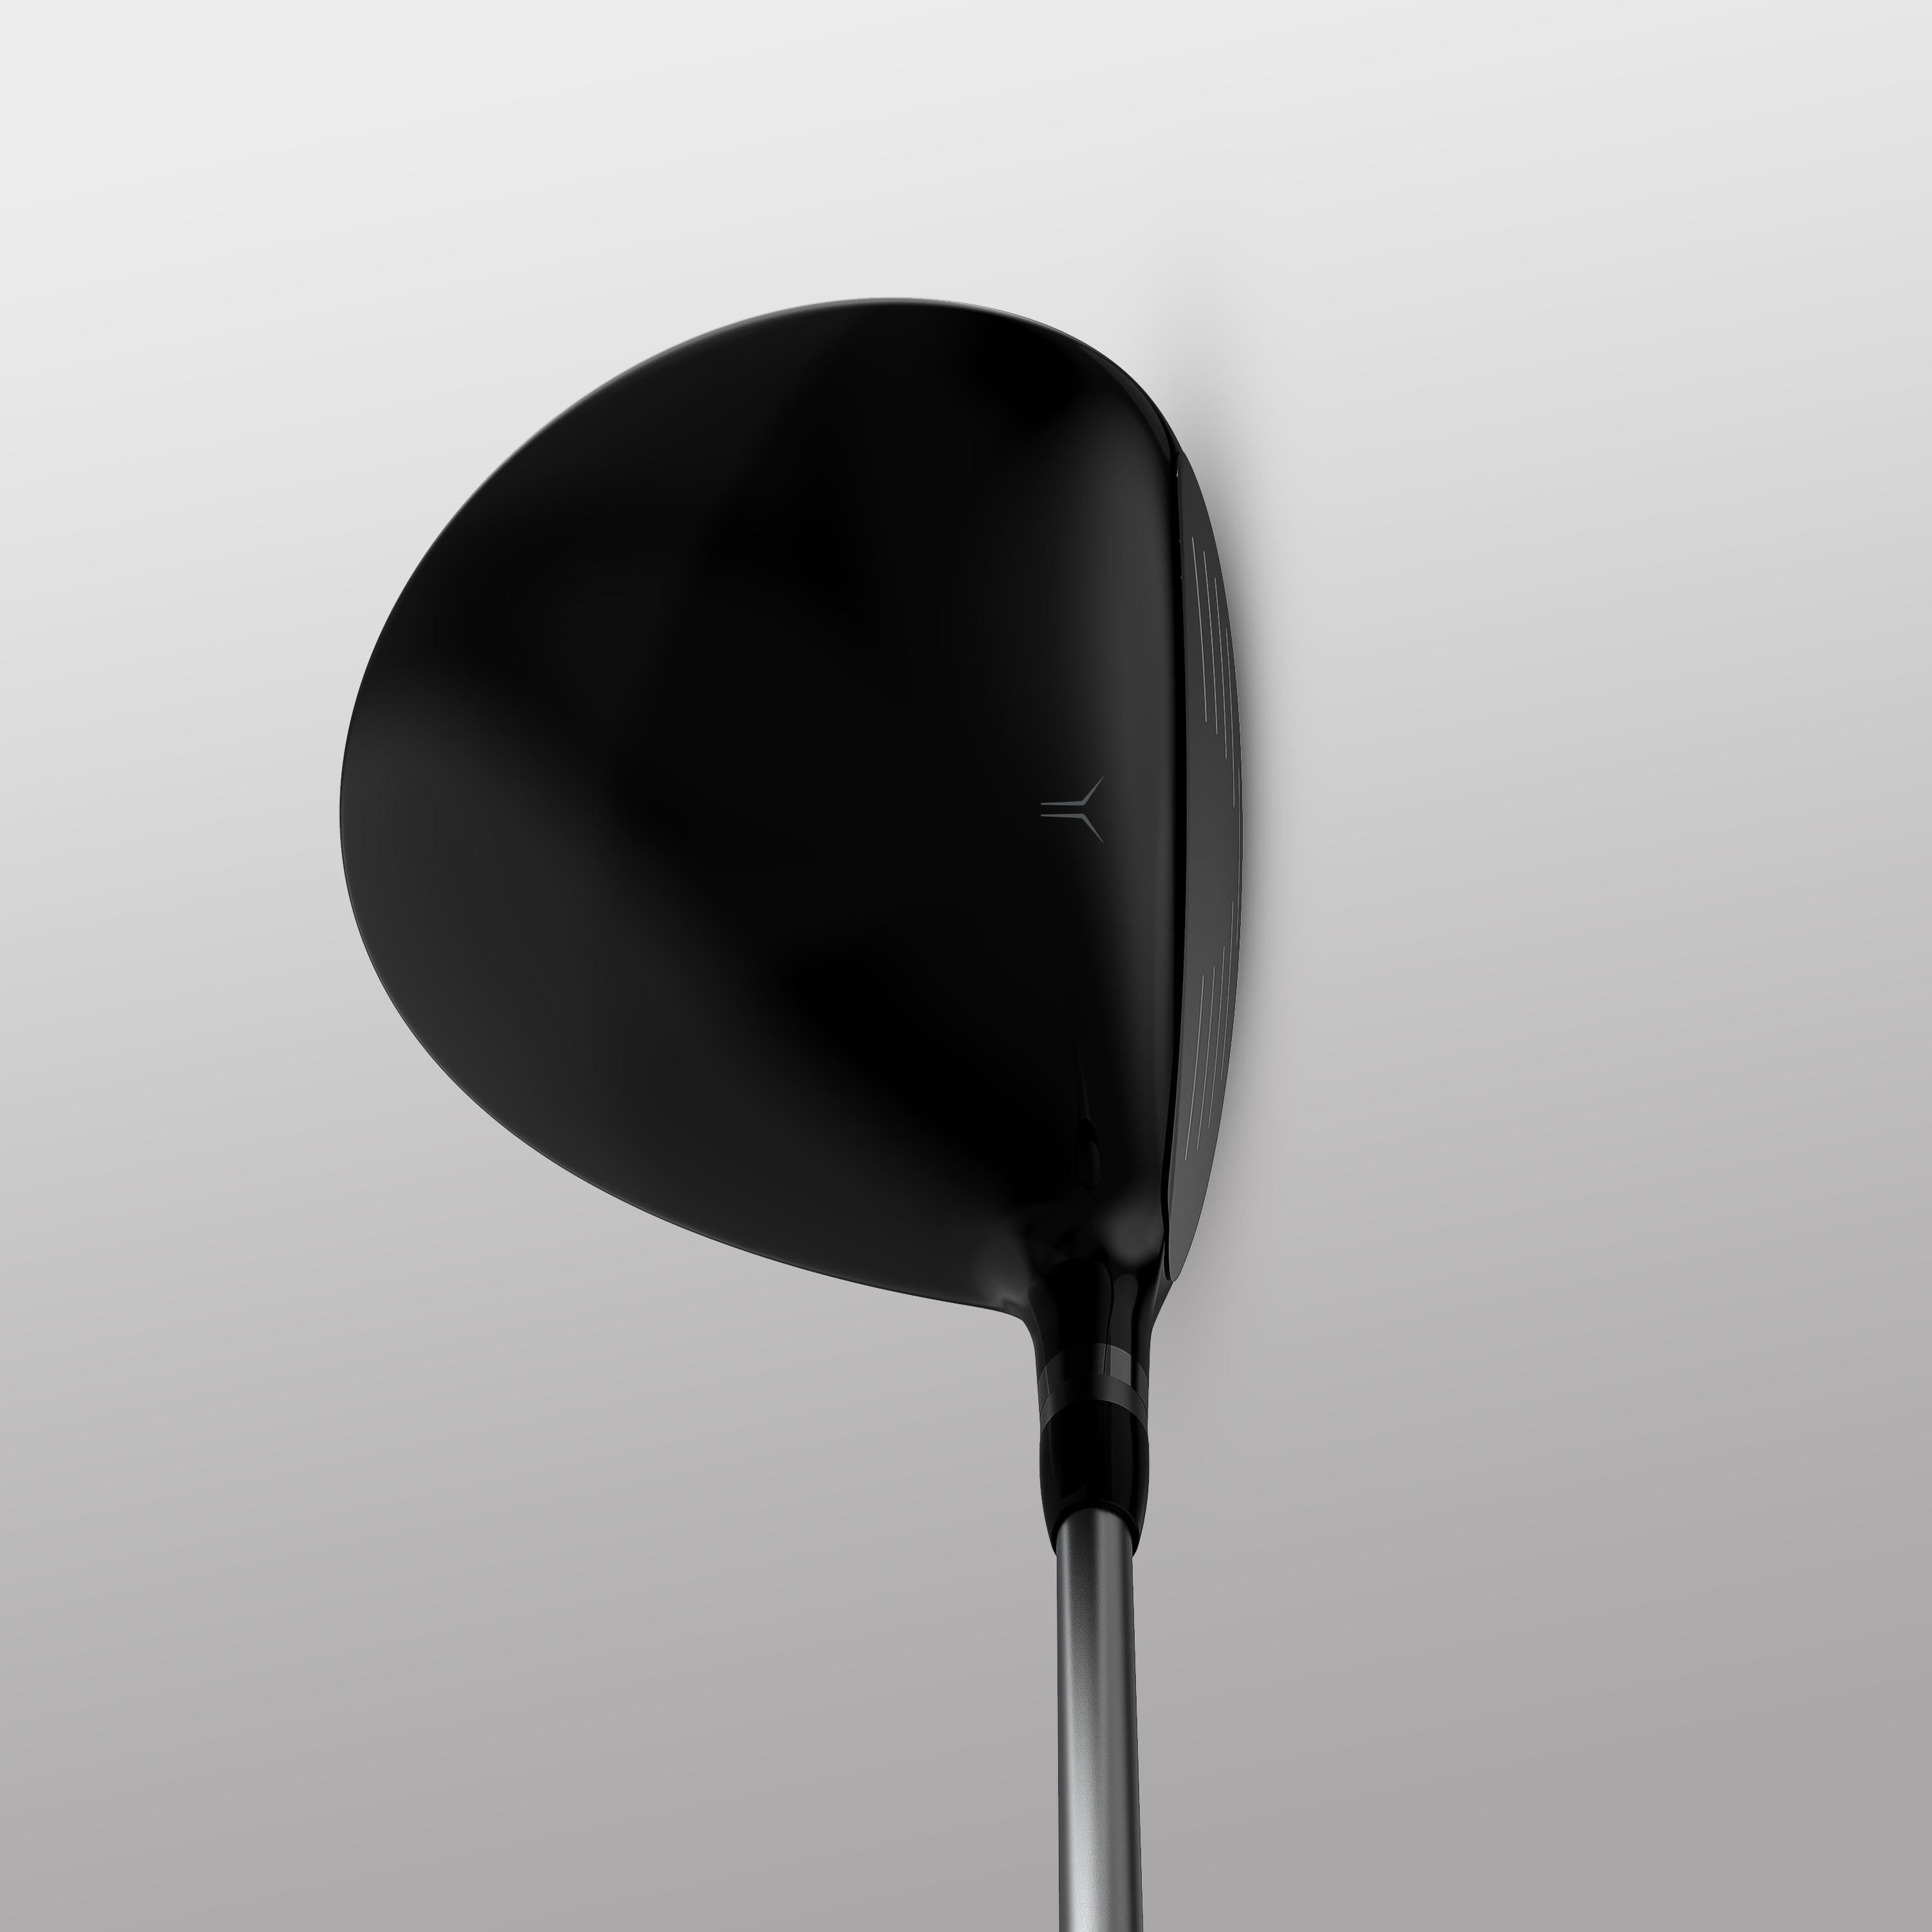 GOLF DRIVER 500 LEFT HANDED SIZE 1 & LOW SPEED 2/9